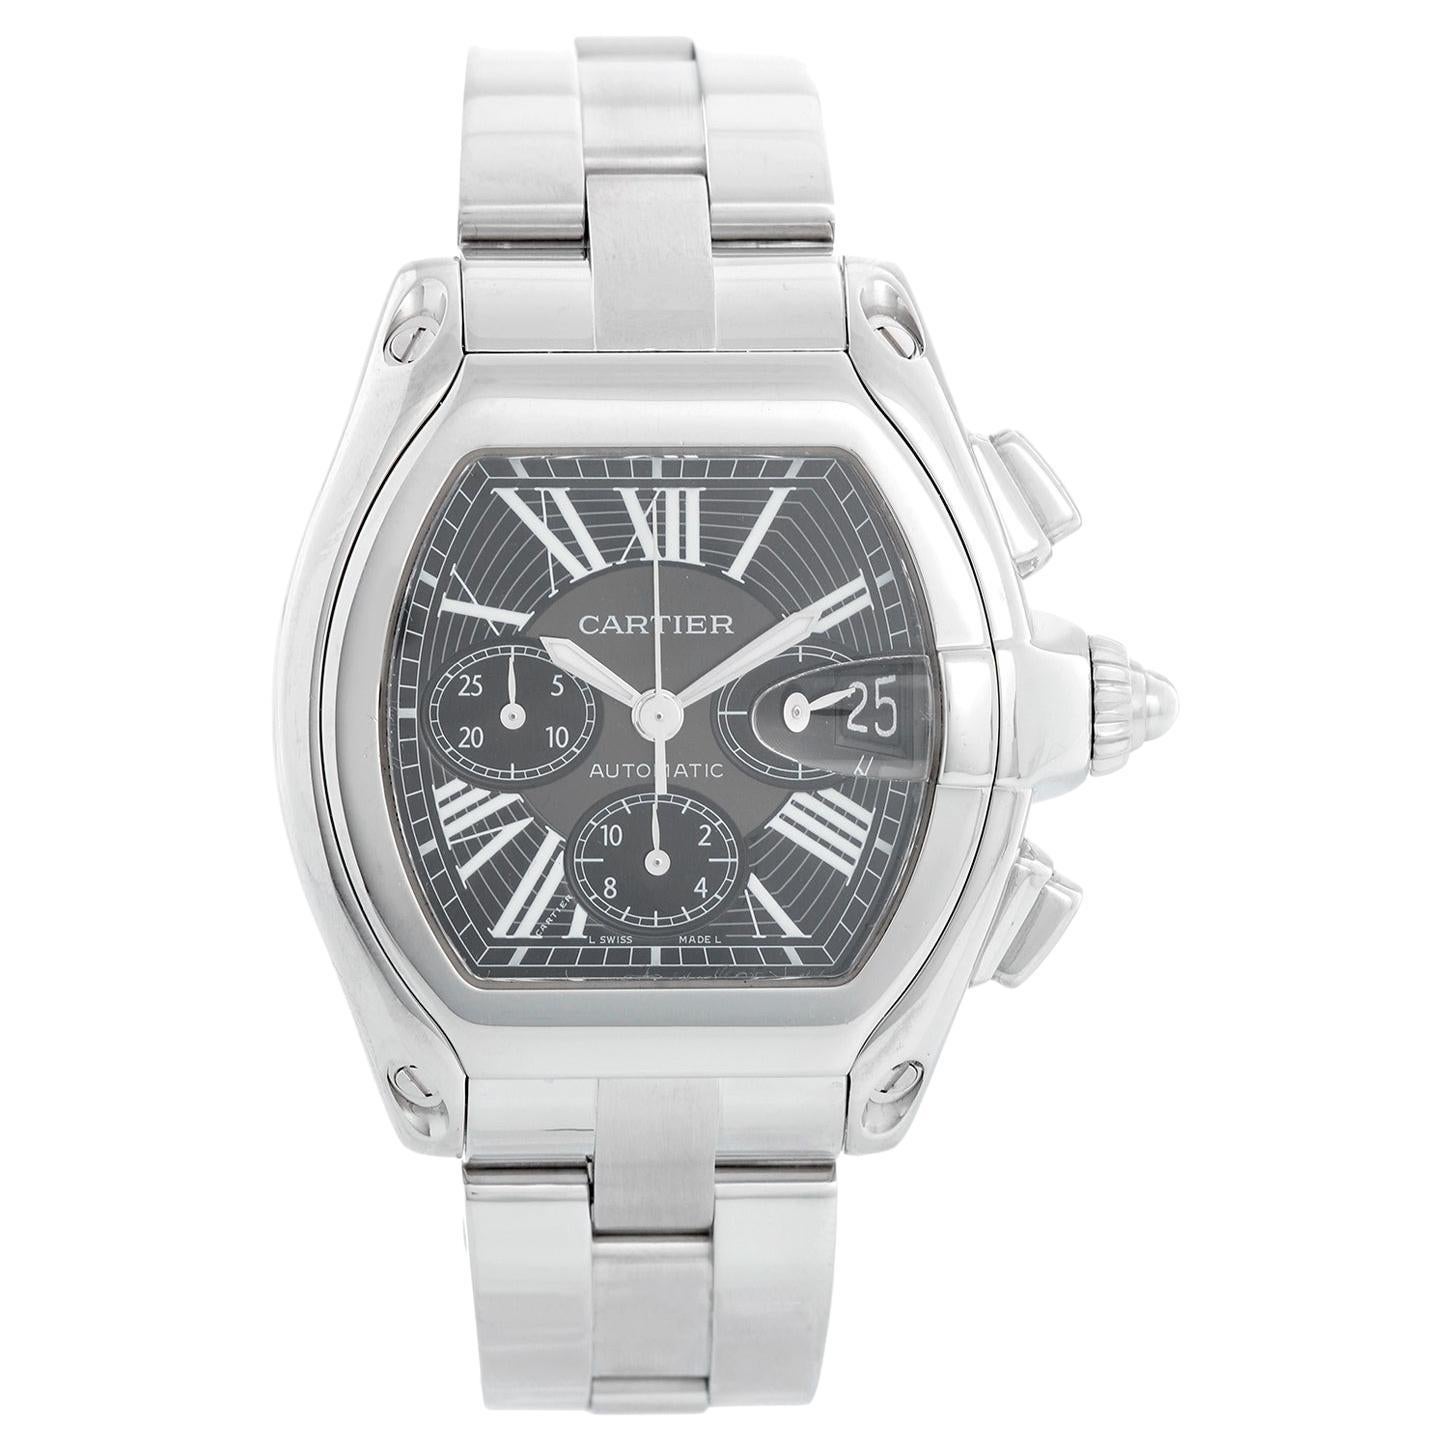 Cartier Roadster Chronograph Stainless Steel Men's Watch W62020X6 2618 For Sale